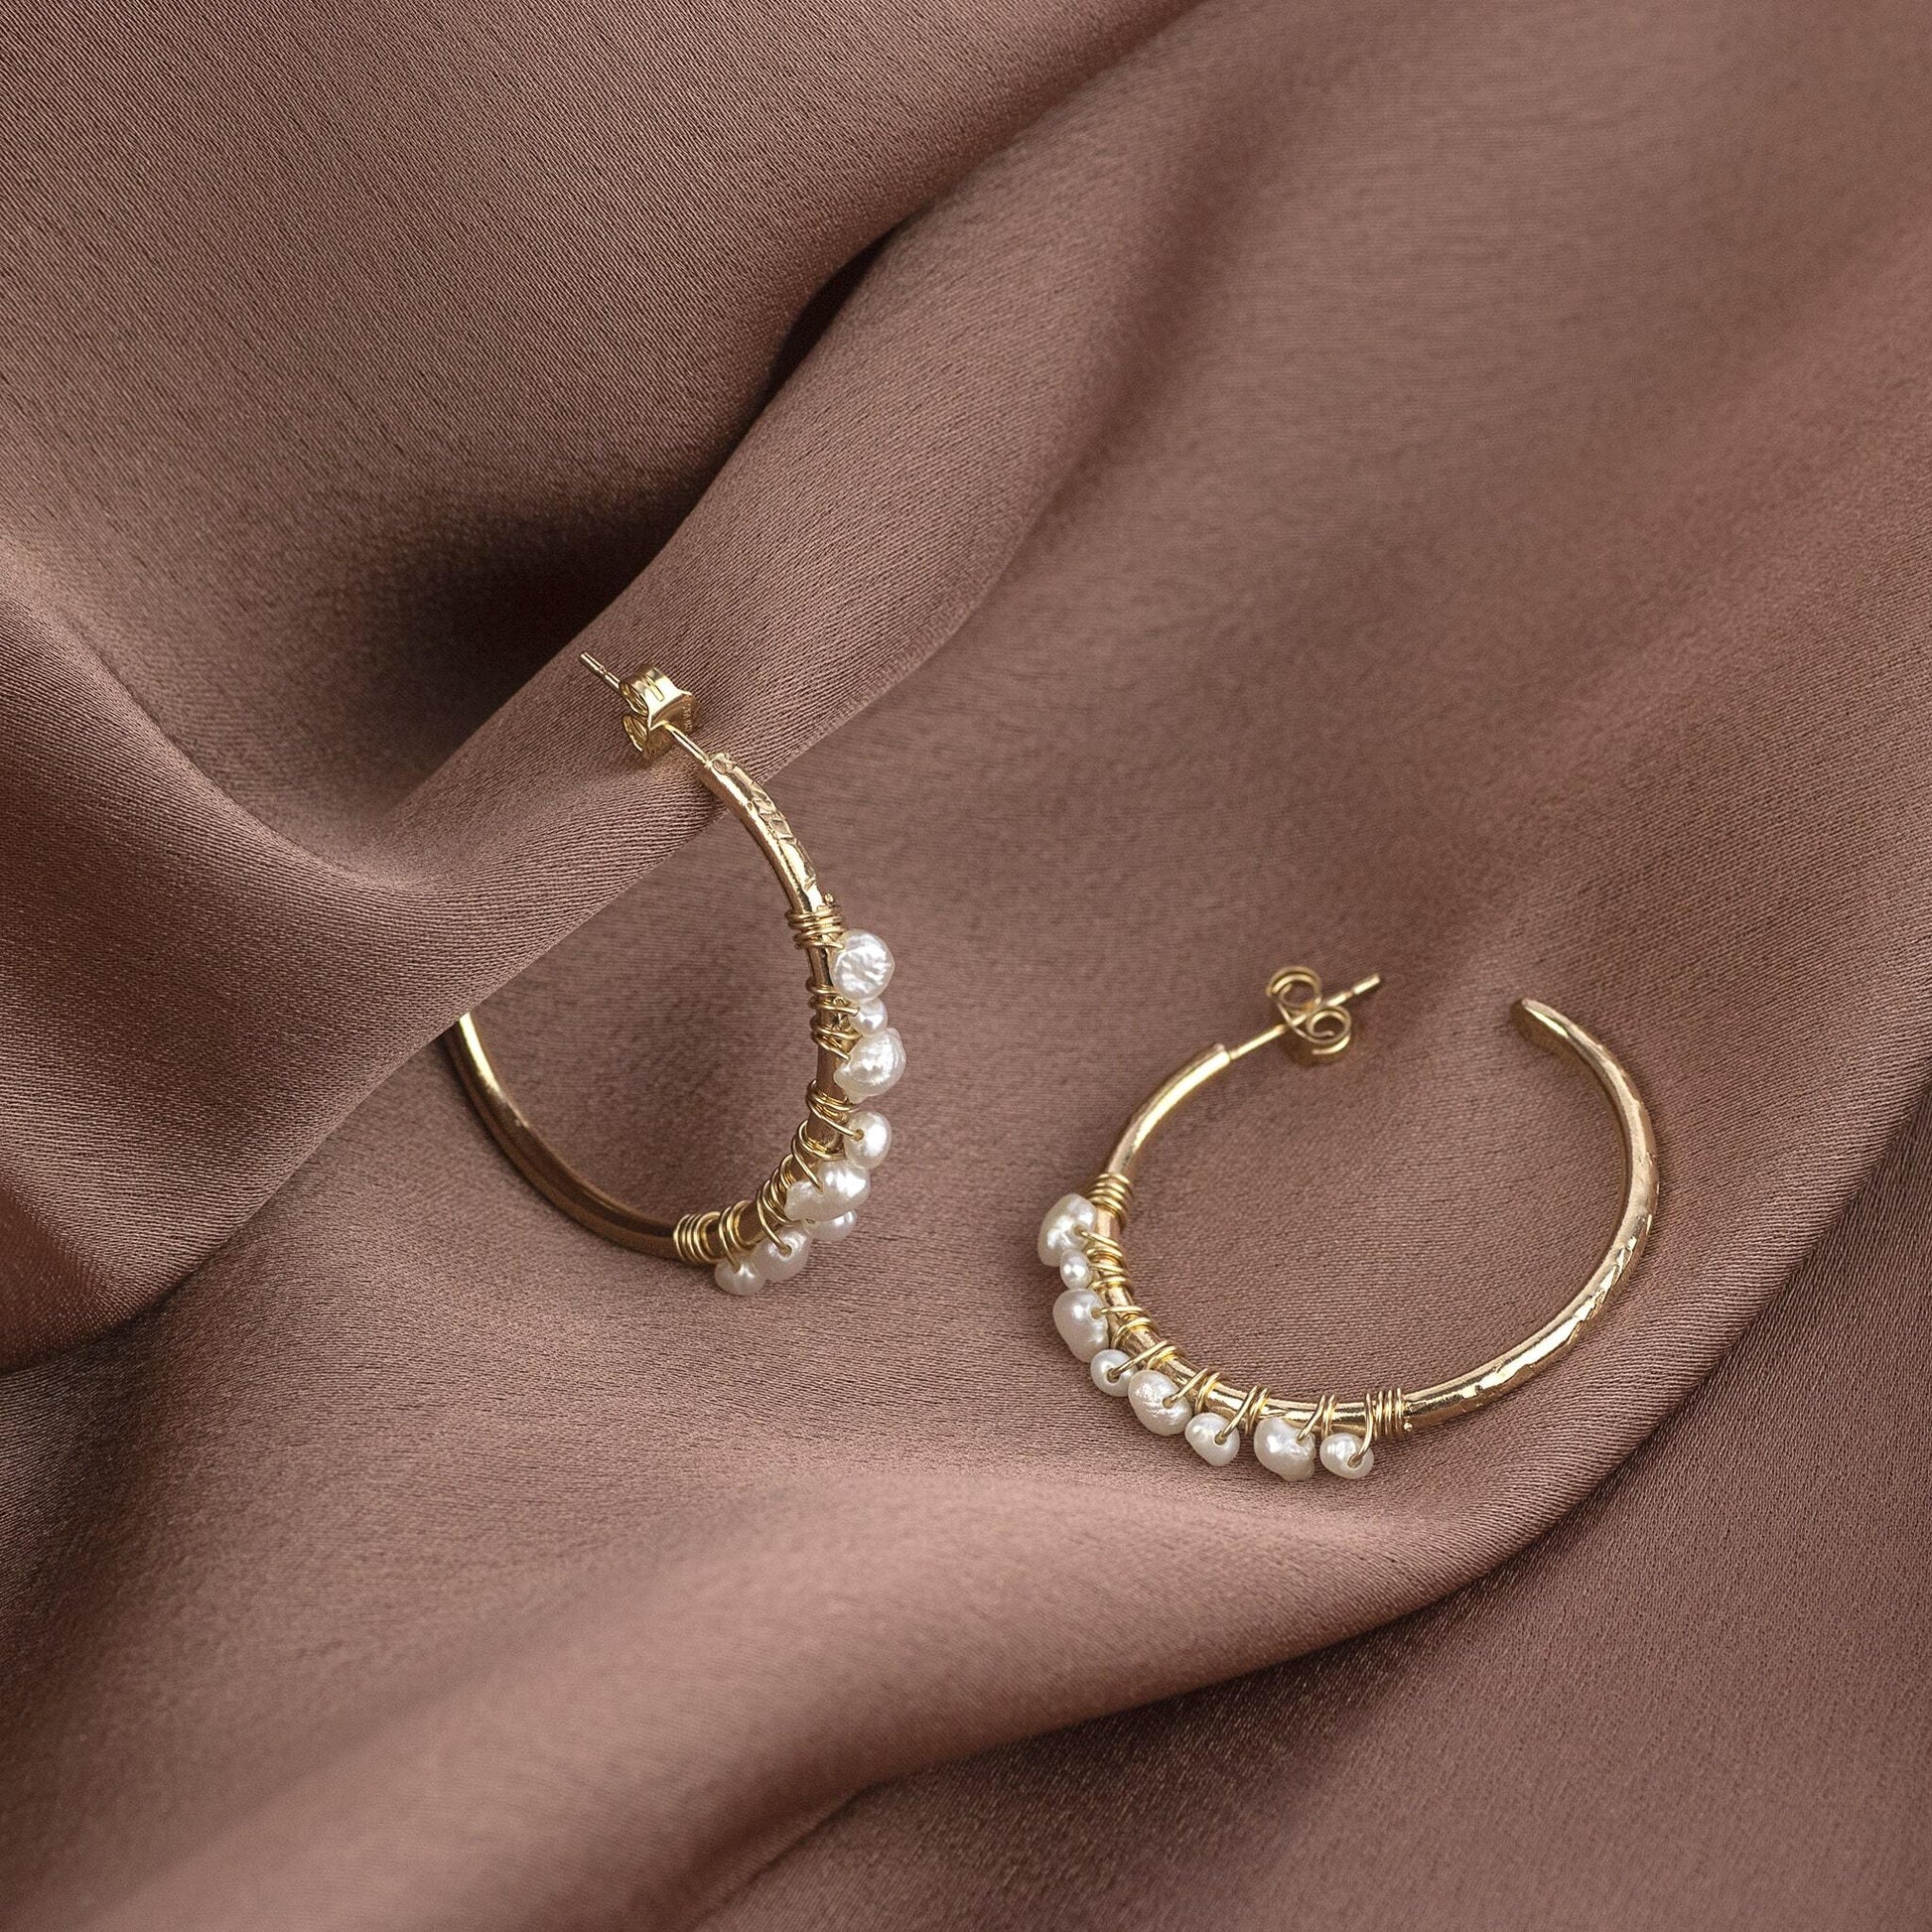 Hoop Earrings Wrapped with Pearls - Silver & Gold - Julia